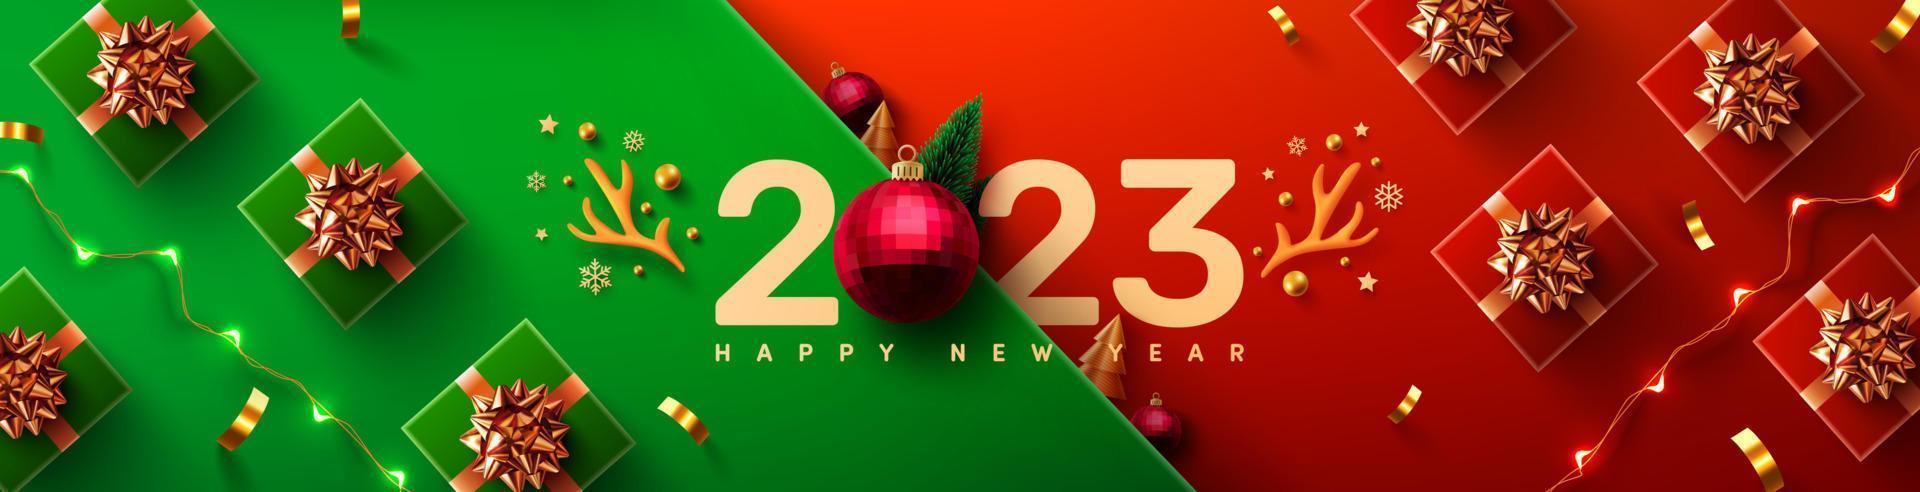 New Year 2023 Promotion Poster or banner with gift box and christmas element for Retail,Shopping or Christmas Promotion.New year 2023 Symbol with red ball ornaments.vector illustration eps 10 vector